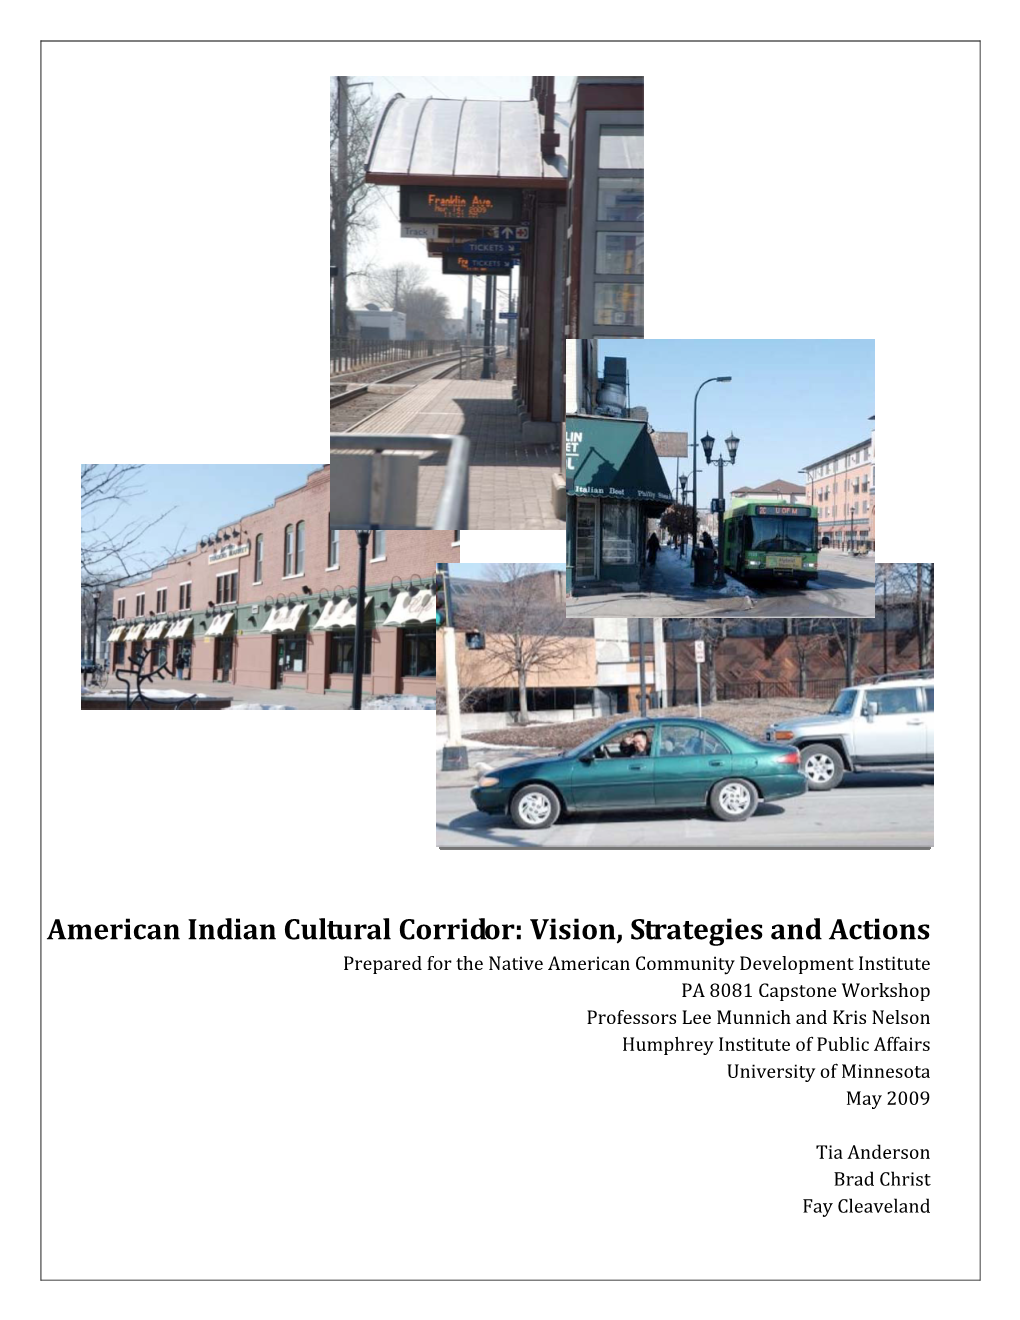 American Indian Cultural Corridor: Vision, Strategies and Actions